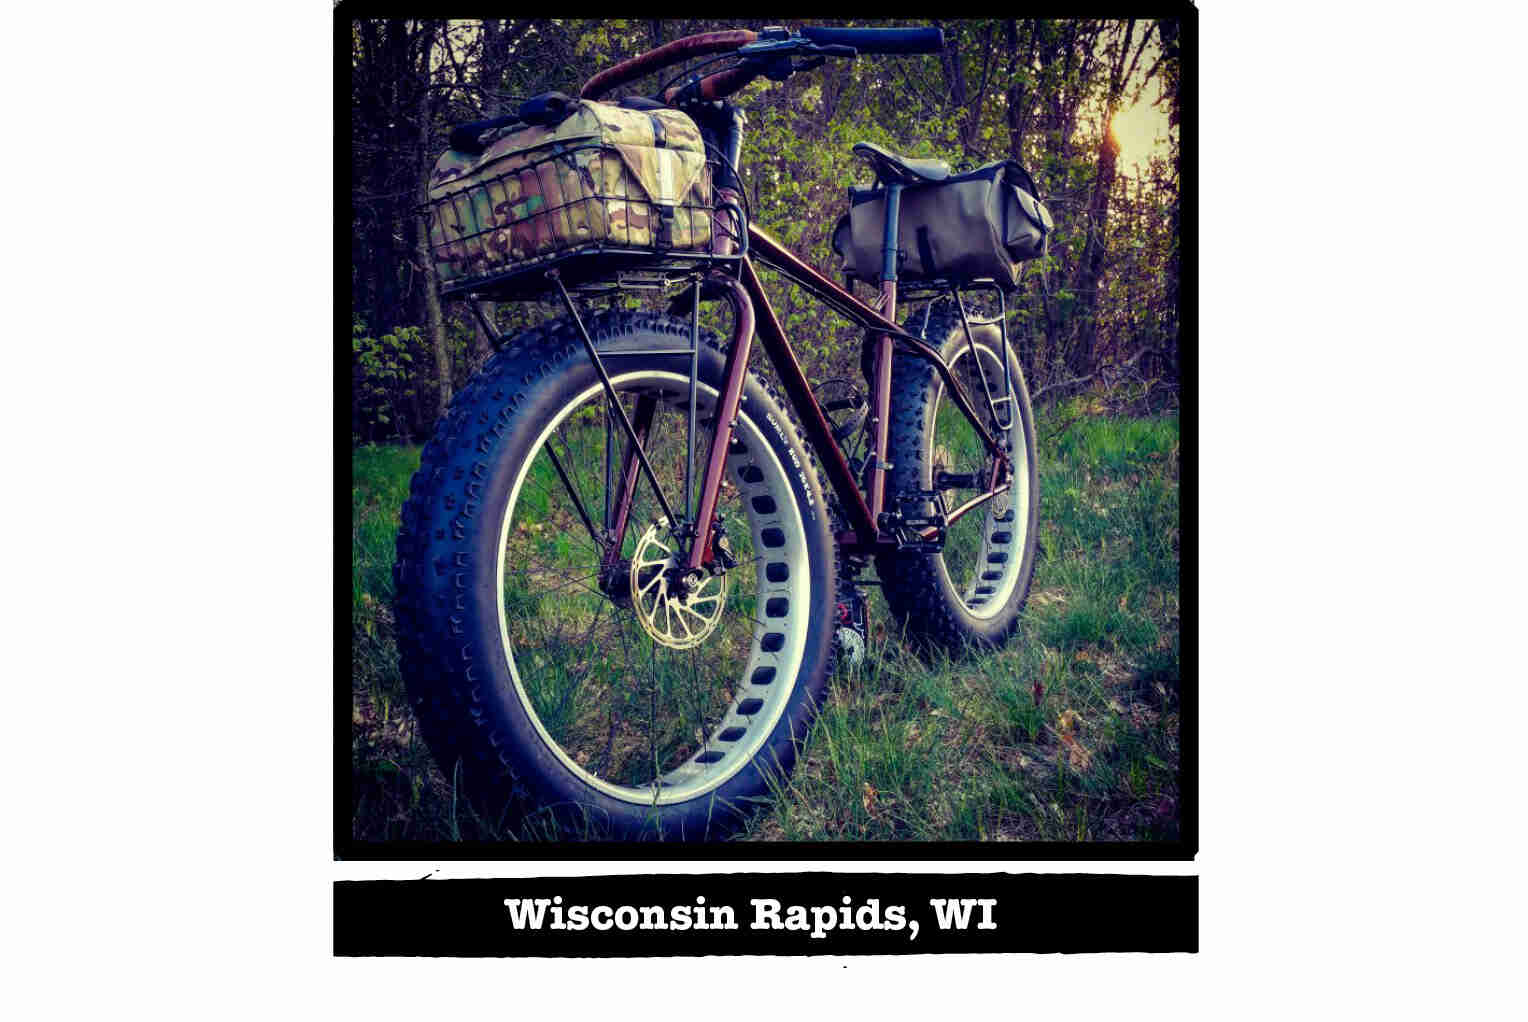 Front right view of a Surly fat bike on grass, woods in the background - Wisconsin Rapids, WI tag below image